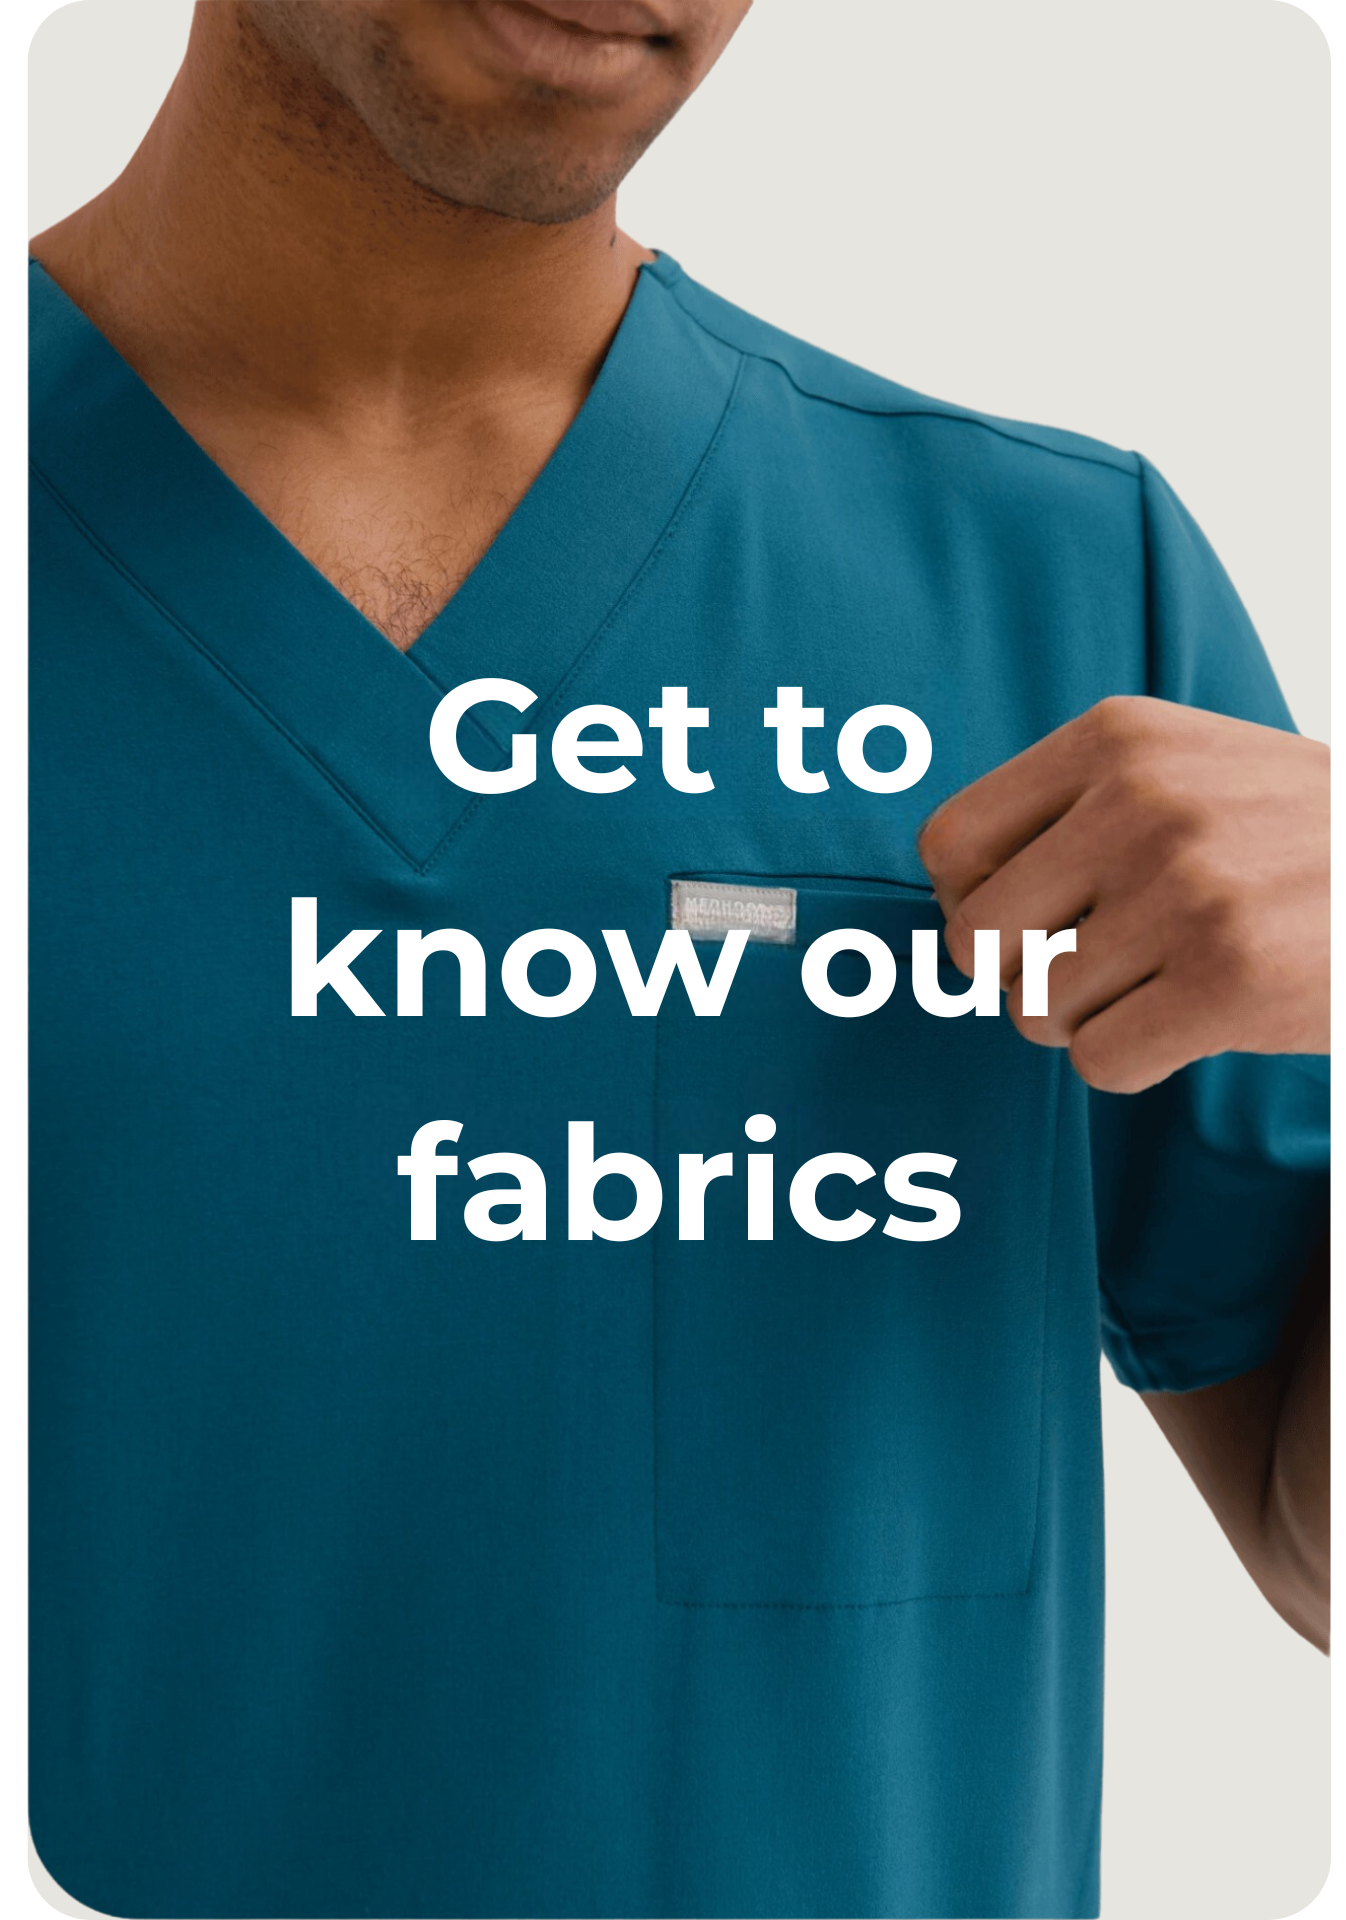 Get to know our fabrics